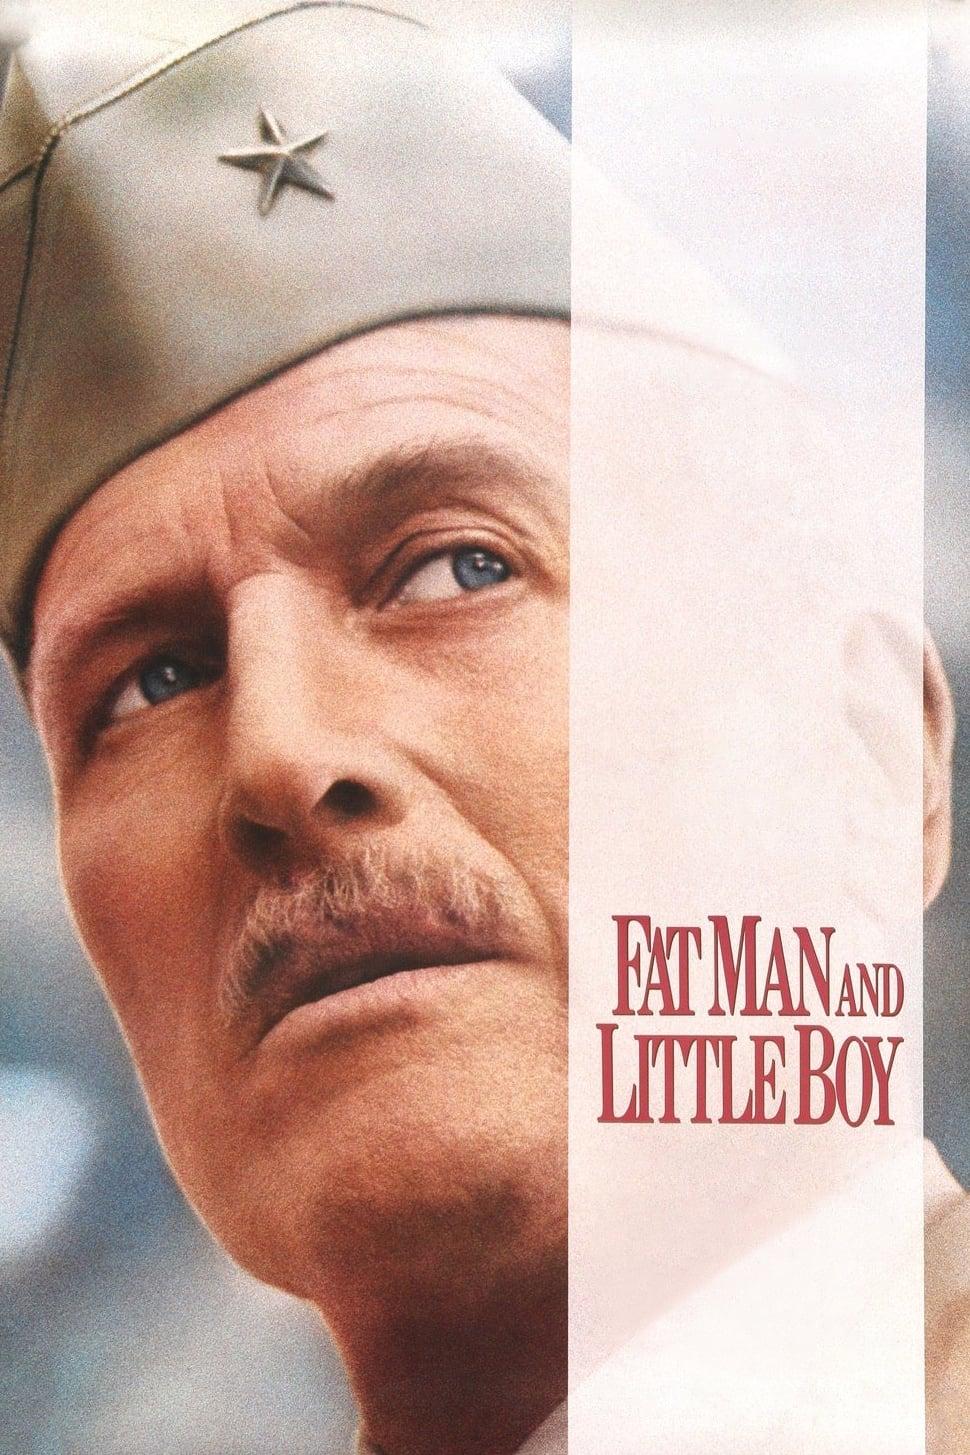 Fat Man and Little Boy poster